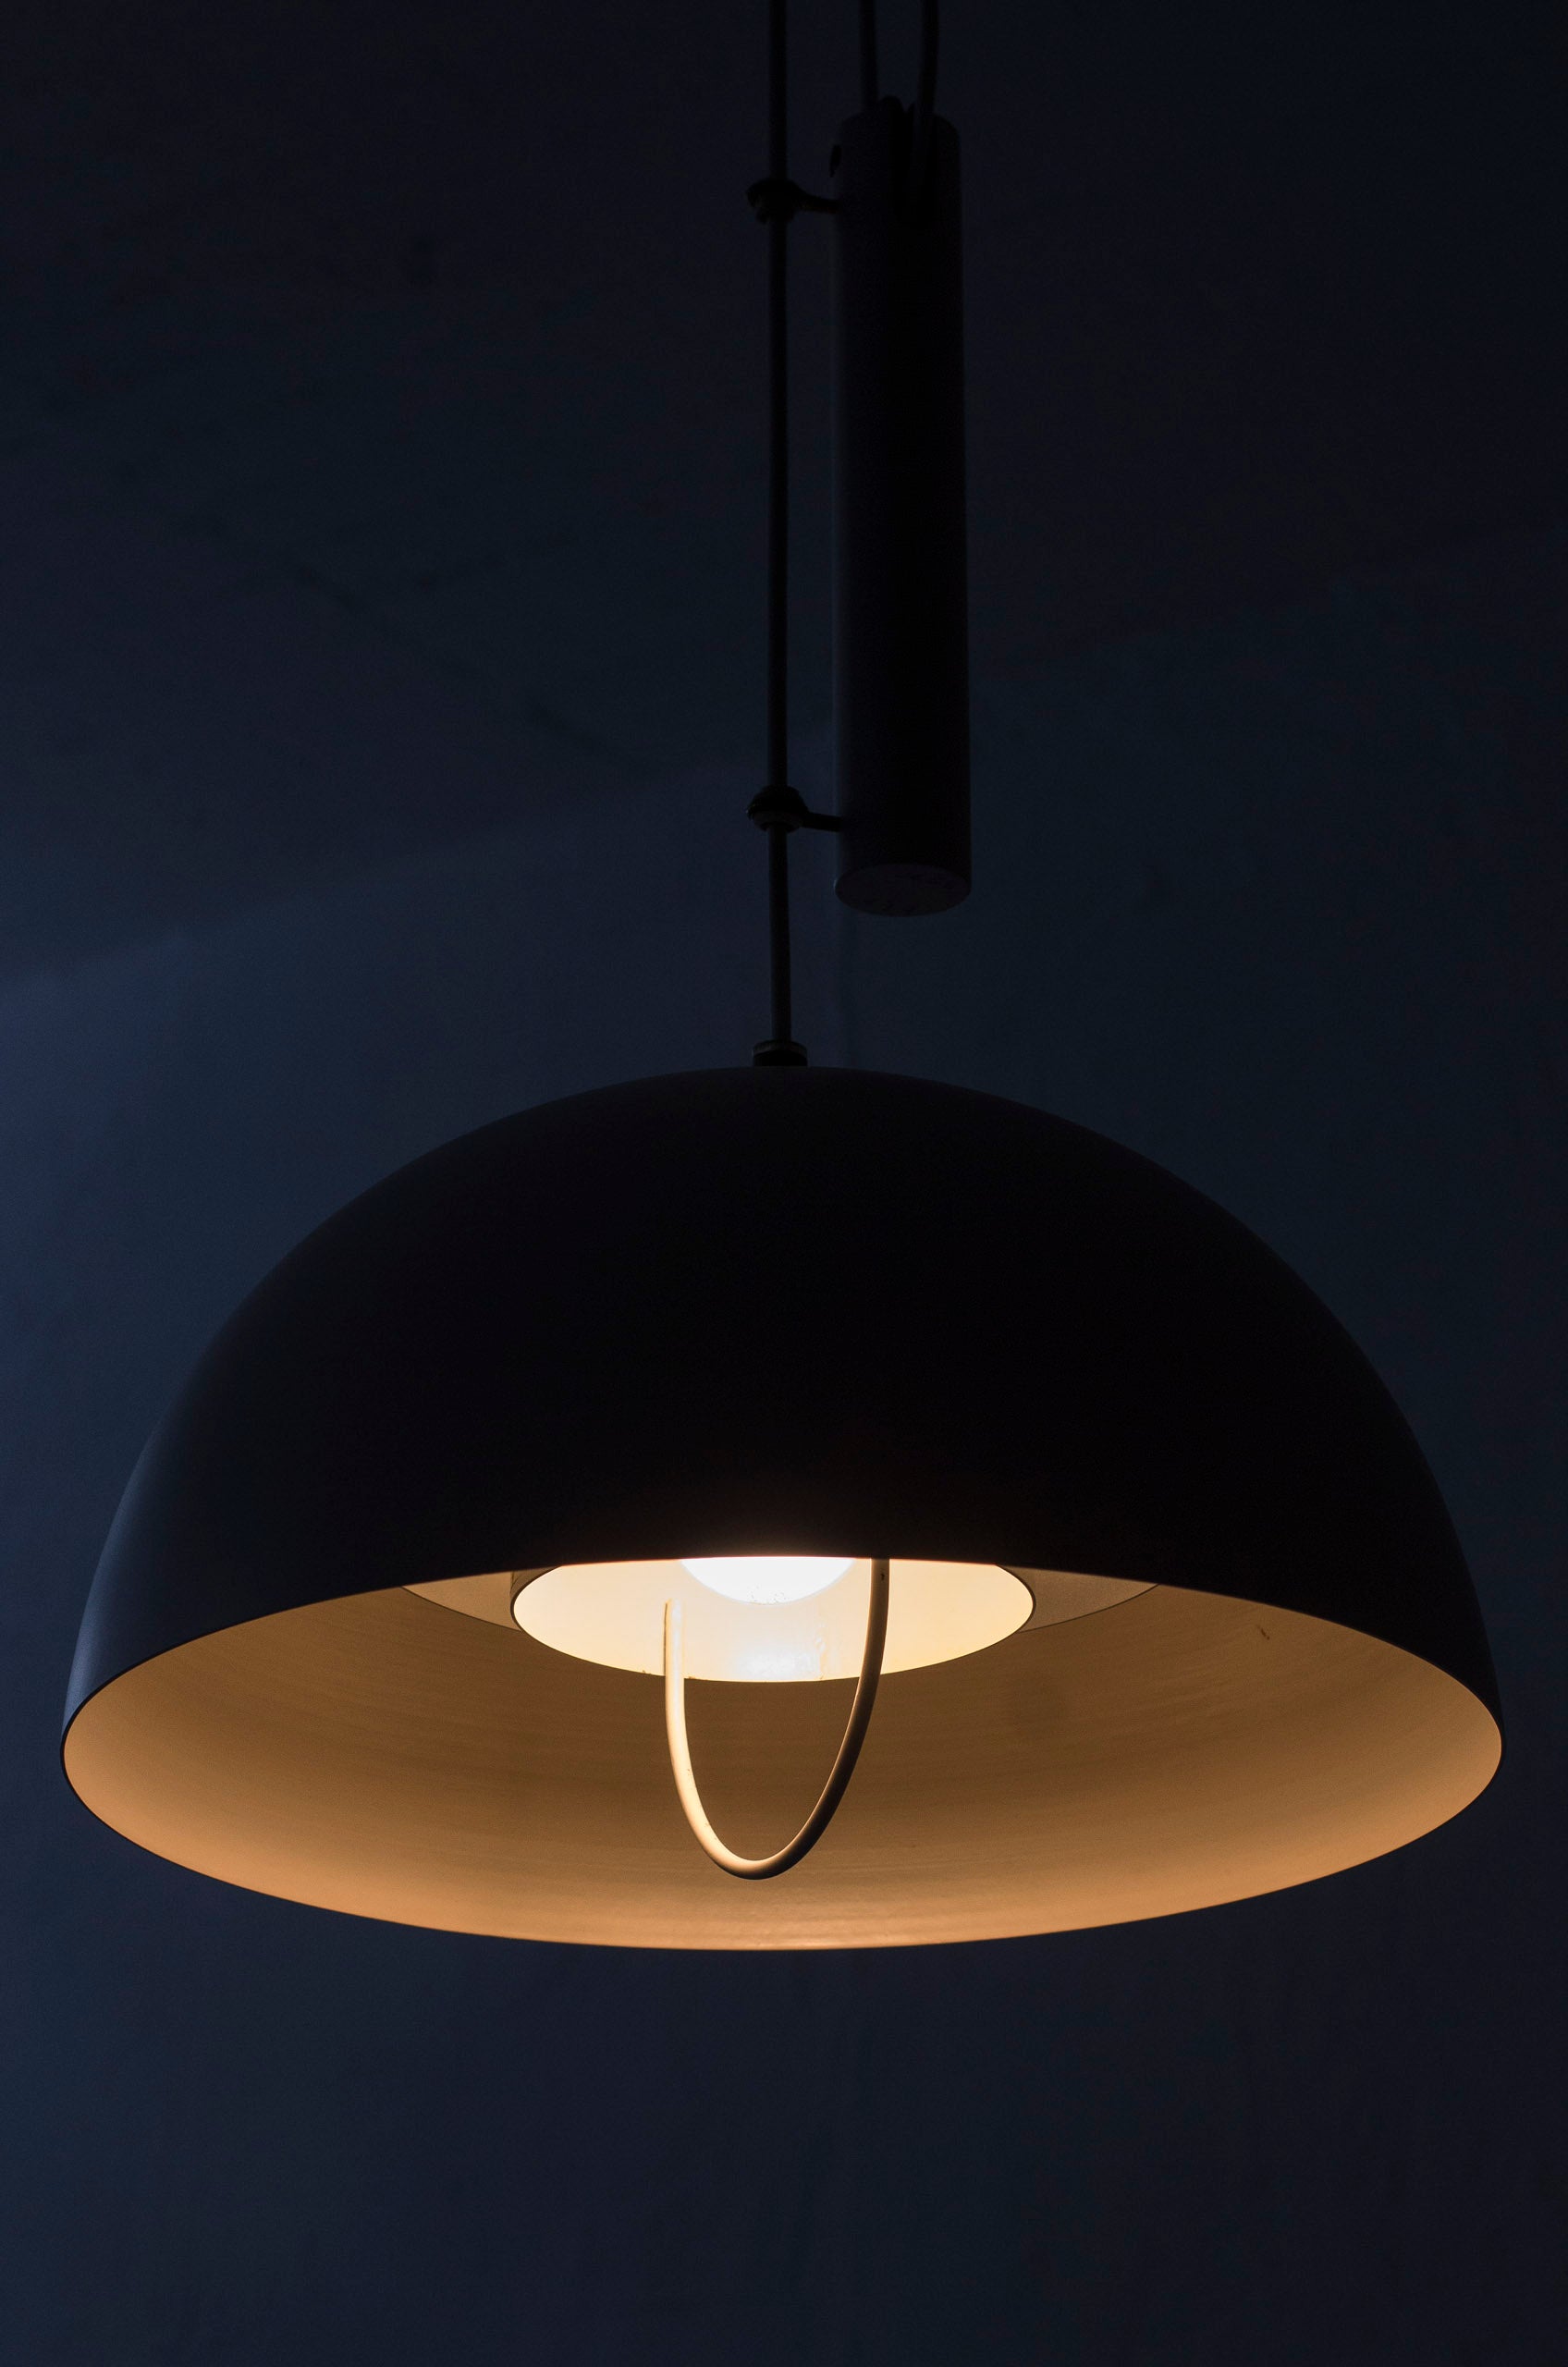 Pendant lamps attributed to Hans-Agne Jakobsson